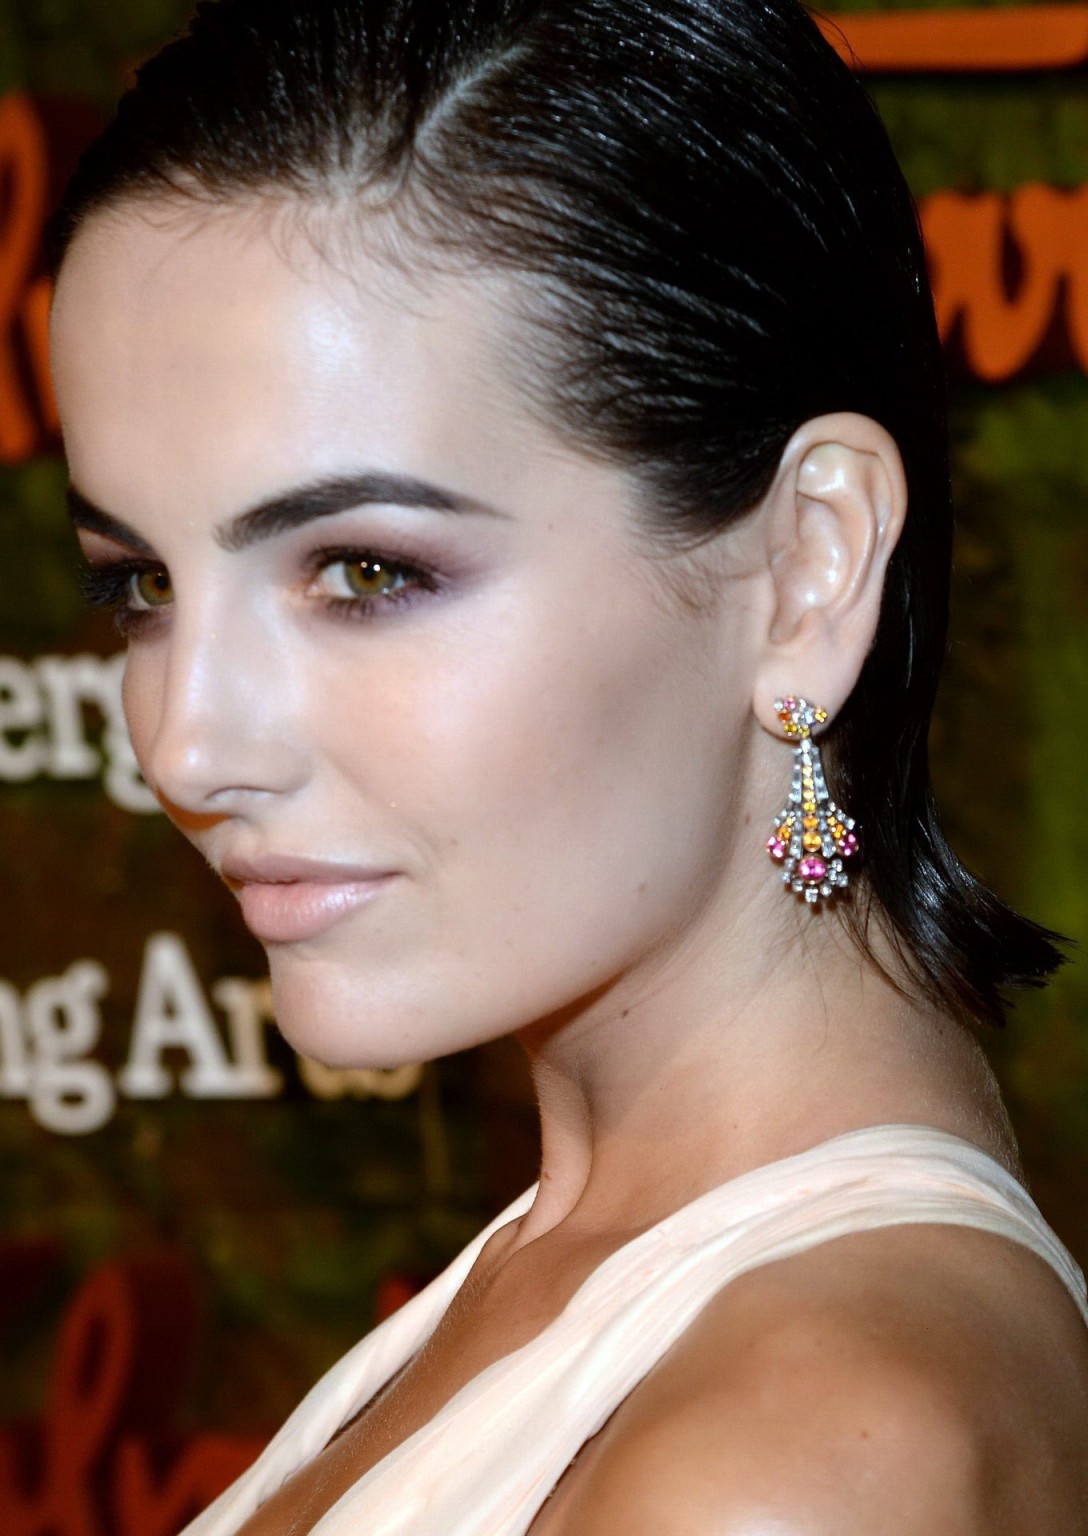 Camilla Belle showing huge cleavage at Wallis Annenberg Performing Arts Gala in  #75215497